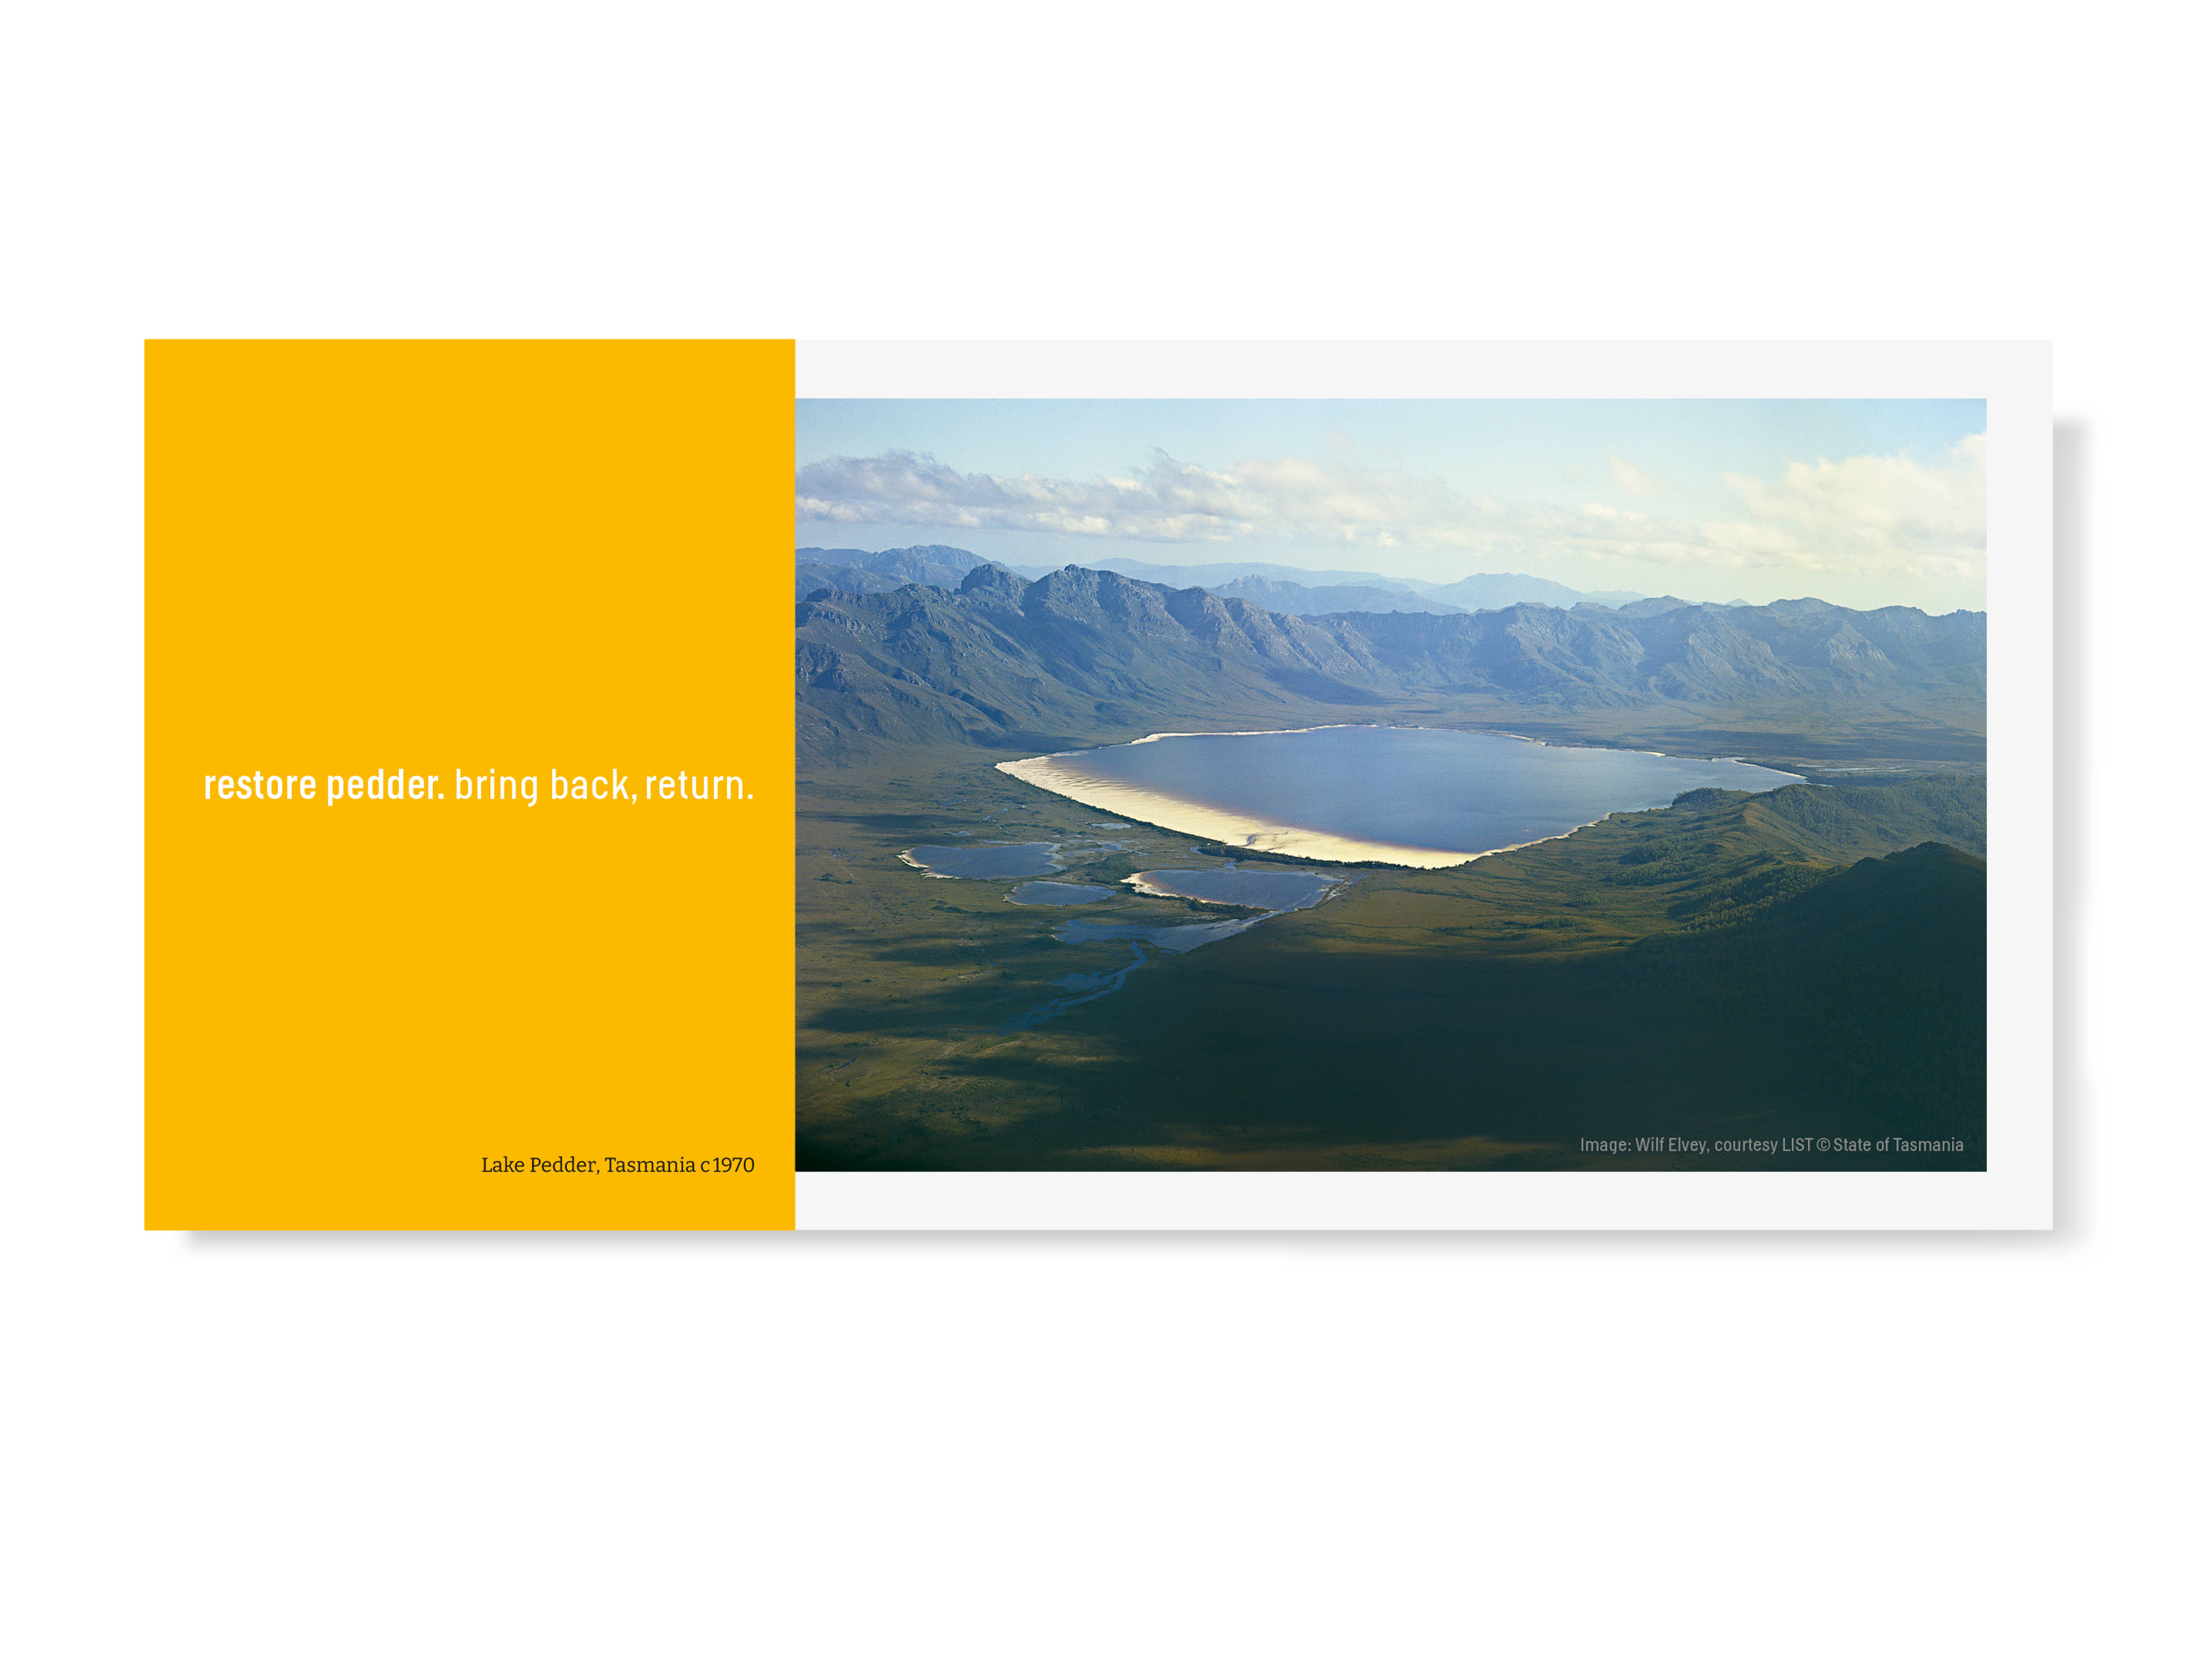 One of the postcards in the water[shed] postcard set. The postcard is a landscape format divided into two sections. The left-hand side features a yellow panel with the words ‘restore pedder. bring back, return’. The right-hand side features a photograph of Lake Pedder, Tasmania, c1970 taken by Wilf Elvey prior to the lake’s inundation by the Huon-Serpentine hydro-electric impoundment.